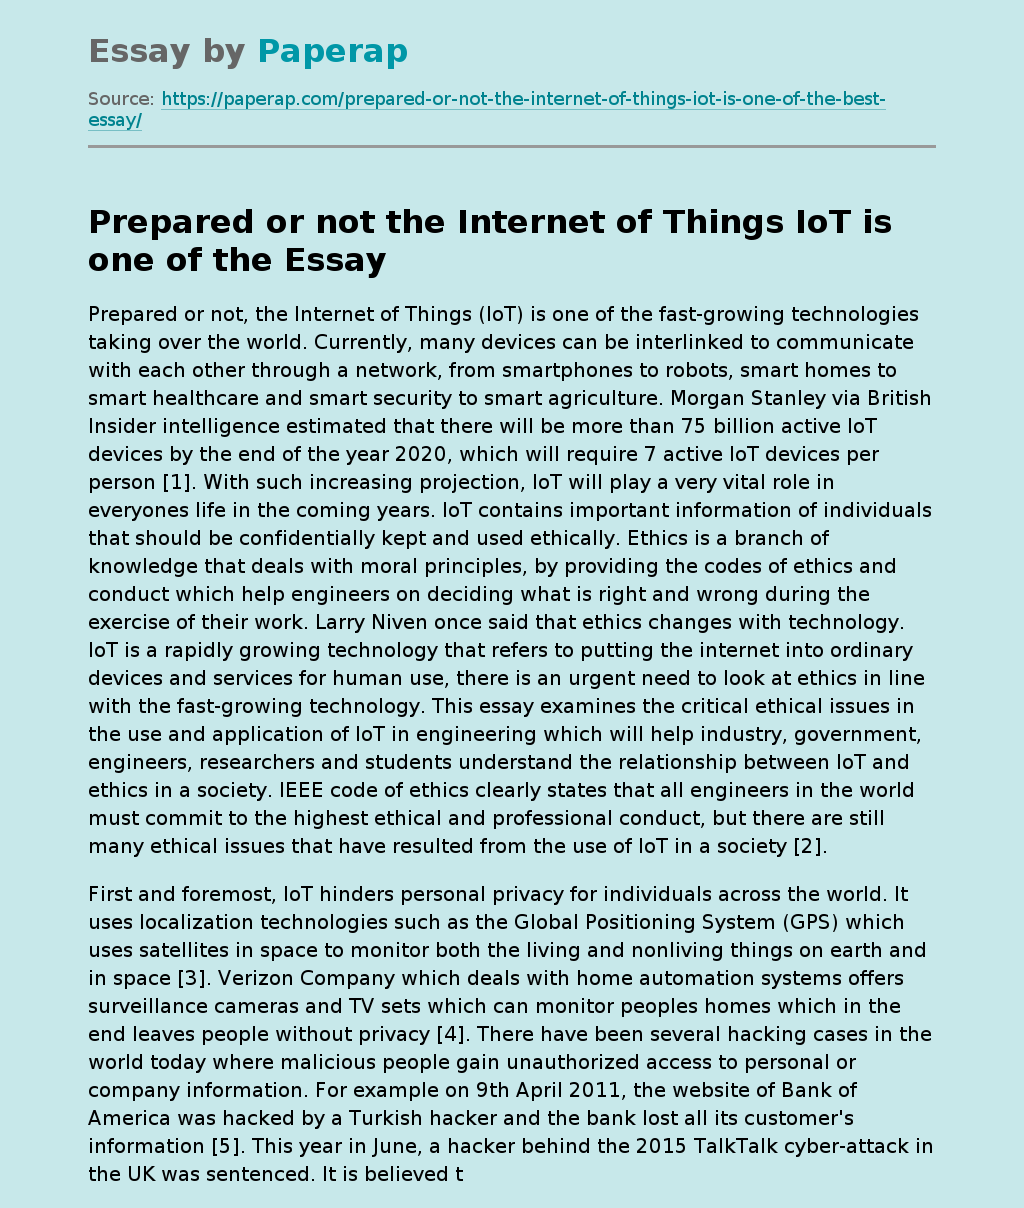 Prepared or Not, the Internet of Things (IoT)